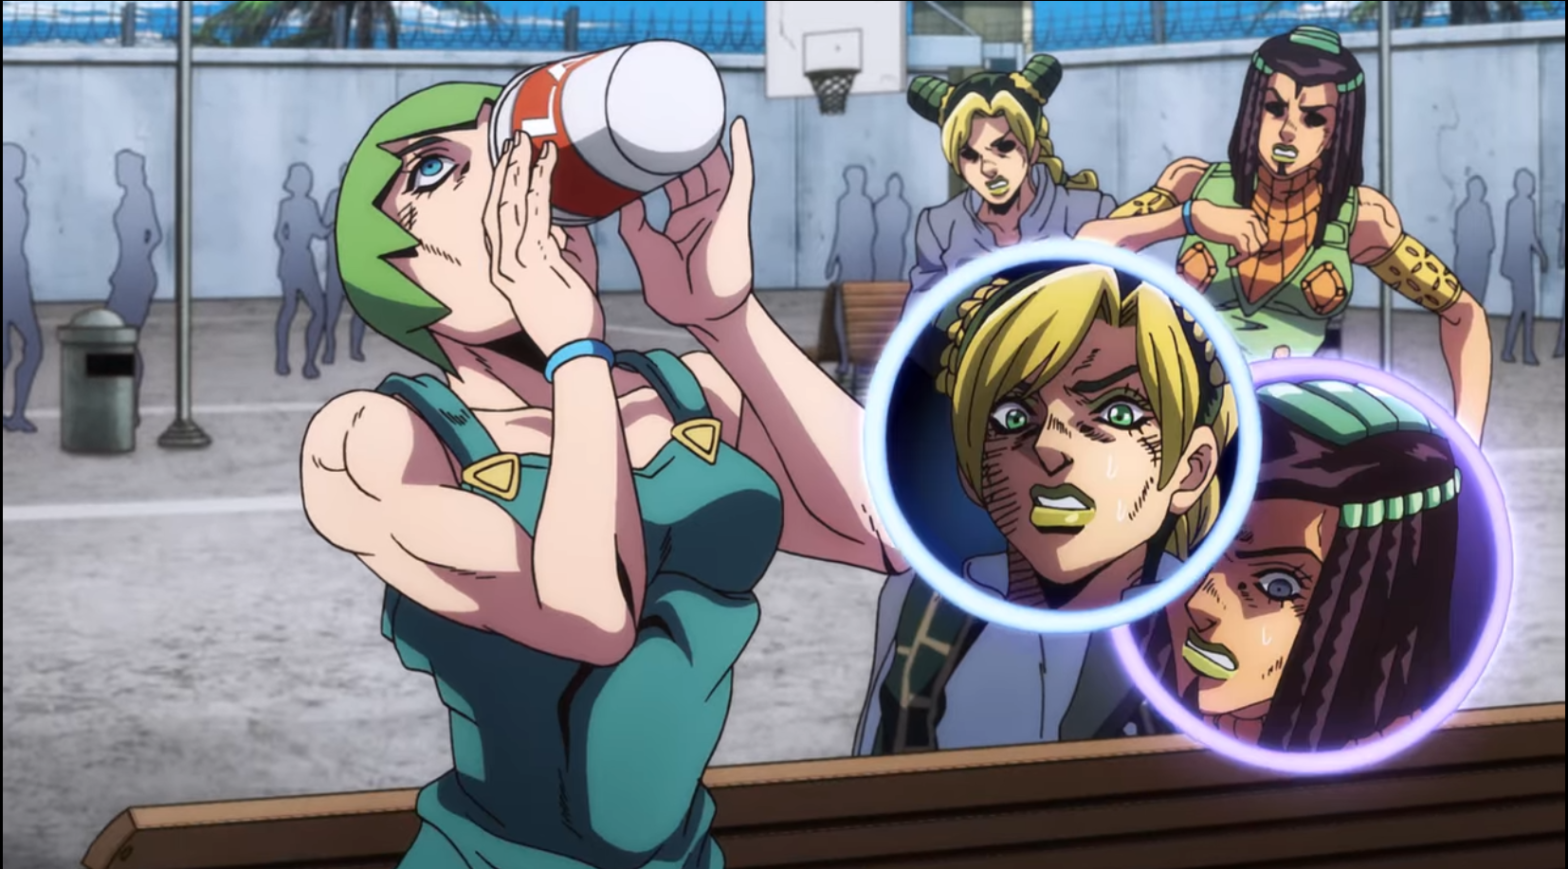 What is the ending song to the Stone Ocean anime and who performs it?